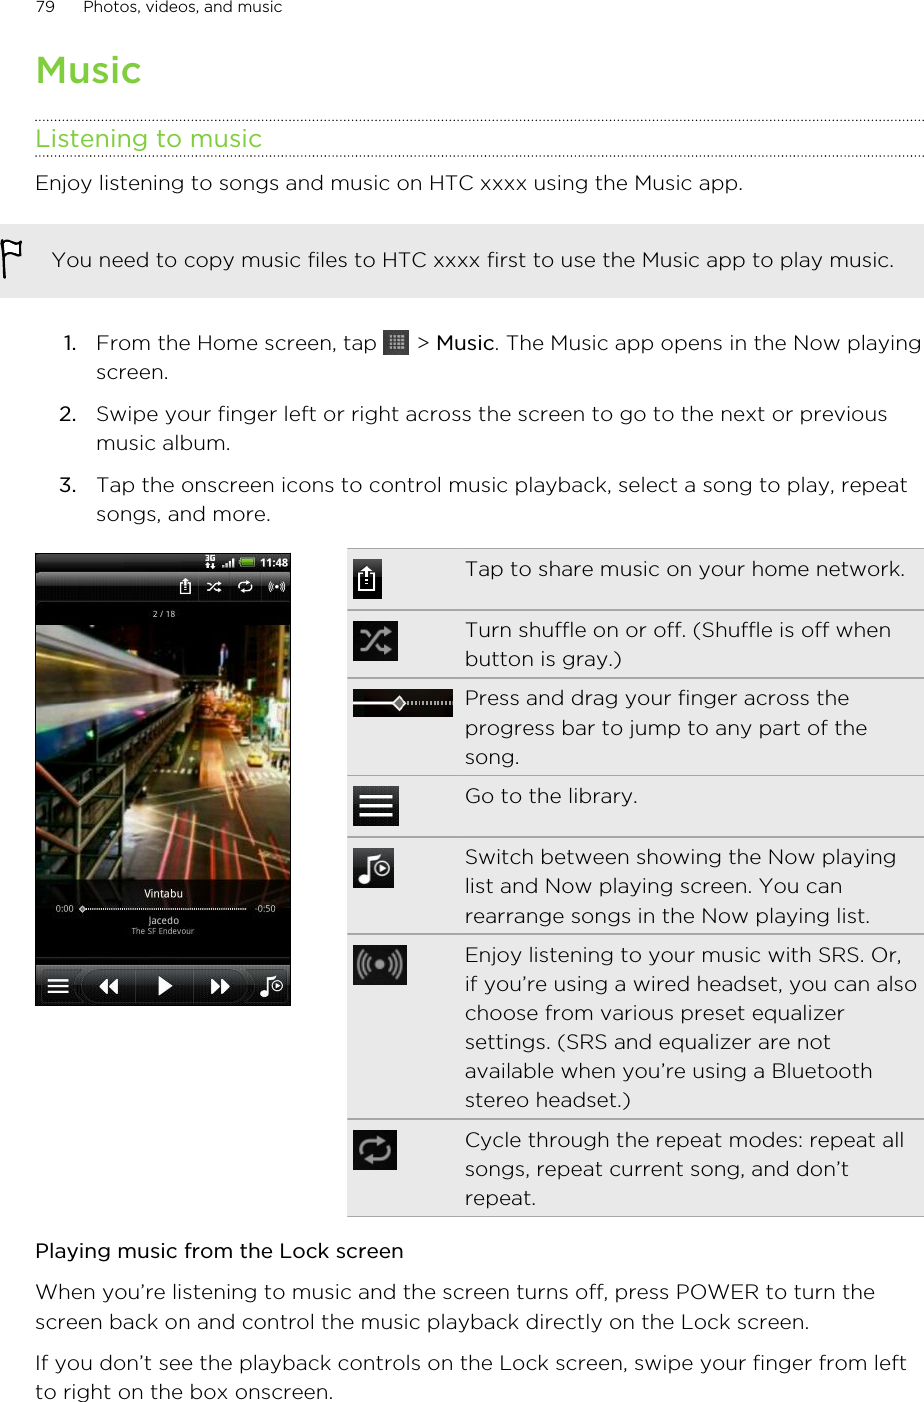 MusicListening to musicEnjoy listening to songs and music on HTC xxxx using the Music app.You need to copy music files to HTC xxxx first to use the Music app to play music.1. From the Home screen, tap   &gt; Music. The Music app opens in the Now playingscreen.2. Swipe your finger left or right across the screen to go to the next or previousmusic album.3. Tap the onscreen icons to control music playback, select a song to play, repeatsongs, and more.Tap to share music on your home network.Turn shuffle on or off. (Shuffle is off whenbutton is gray.)Press and drag your finger across theprogress bar to jump to any part of thesong.Go to the library.Switch between showing the Now playinglist and Now playing screen. You canrearrange songs in the Now playing list.Enjoy listening to your music with SRS. Or,if you’re using a wired headset, you can alsochoose from various preset equalizersettings. (SRS and equalizer are notavailable when you’re using a Bluetoothstereo headset.)Cycle through the repeat modes: repeat allsongs, repeat current song, and don’trepeat.Playing music from the Lock screenWhen you’re listening to music and the screen turns off, press POWER to turn thescreen back on and control the music playback directly on the Lock screen.If you don’t see the playback controls on the Lock screen, swipe your finger from leftto right on the box onscreen.79 Photos, videos, and music